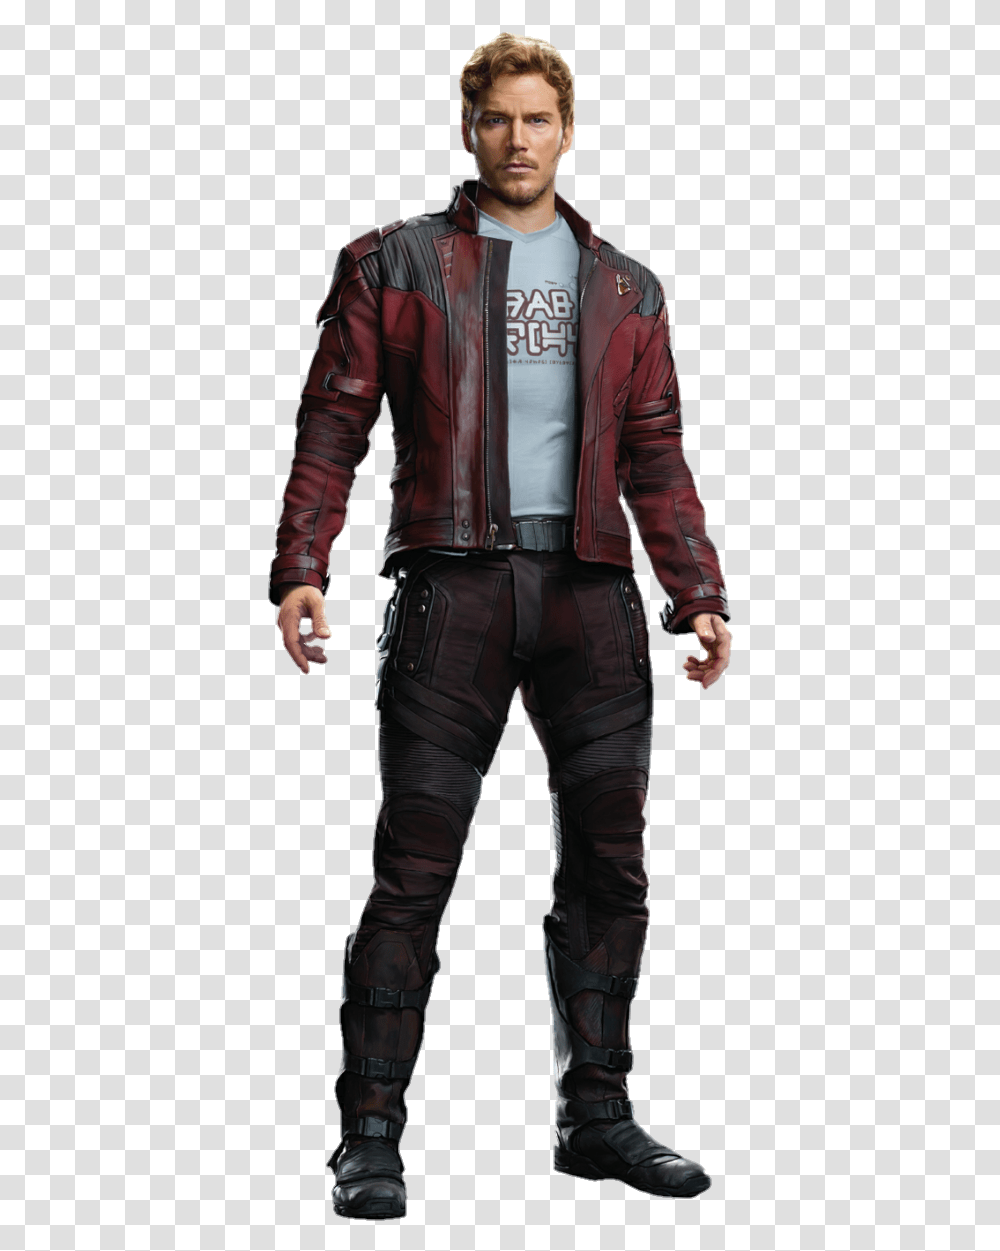 Guardians Of The Galaxy 2 Star Lord Infinity War Costume, Apparel, Jacket, Coat Transparent Png